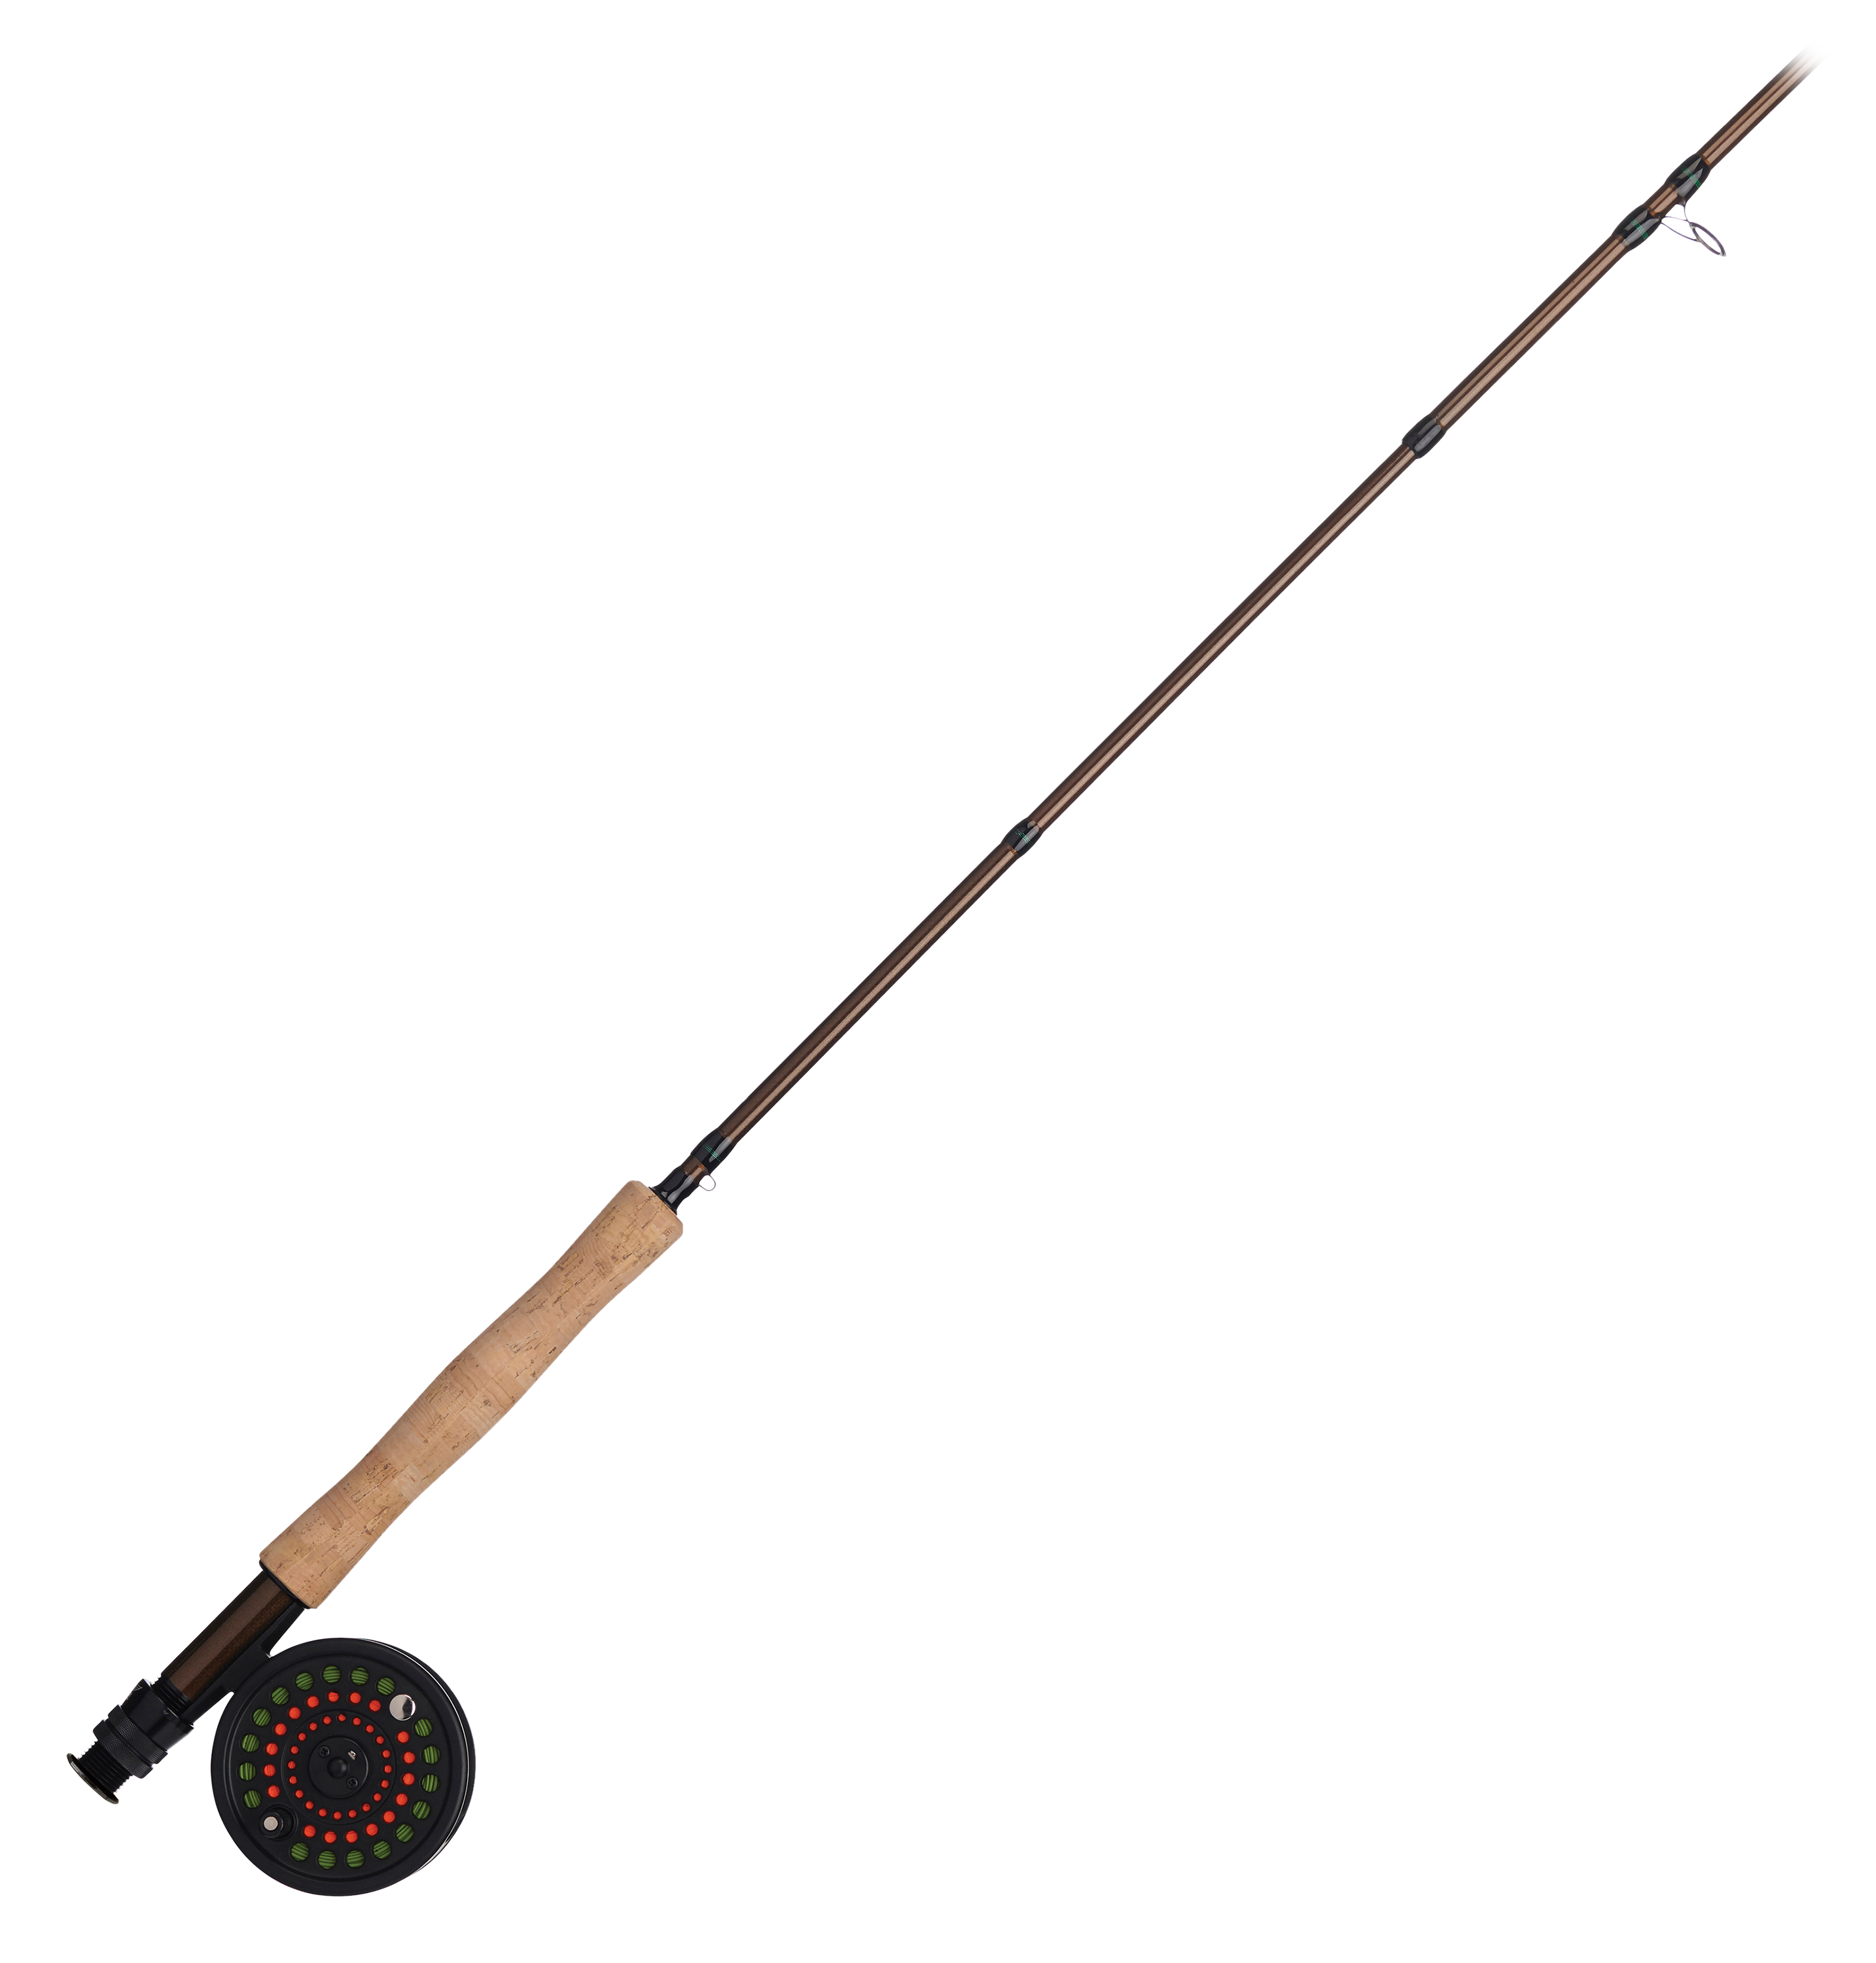 fenwick aetos fly rod, fenwick aetos fly rod Suppliers and Manufacturers at